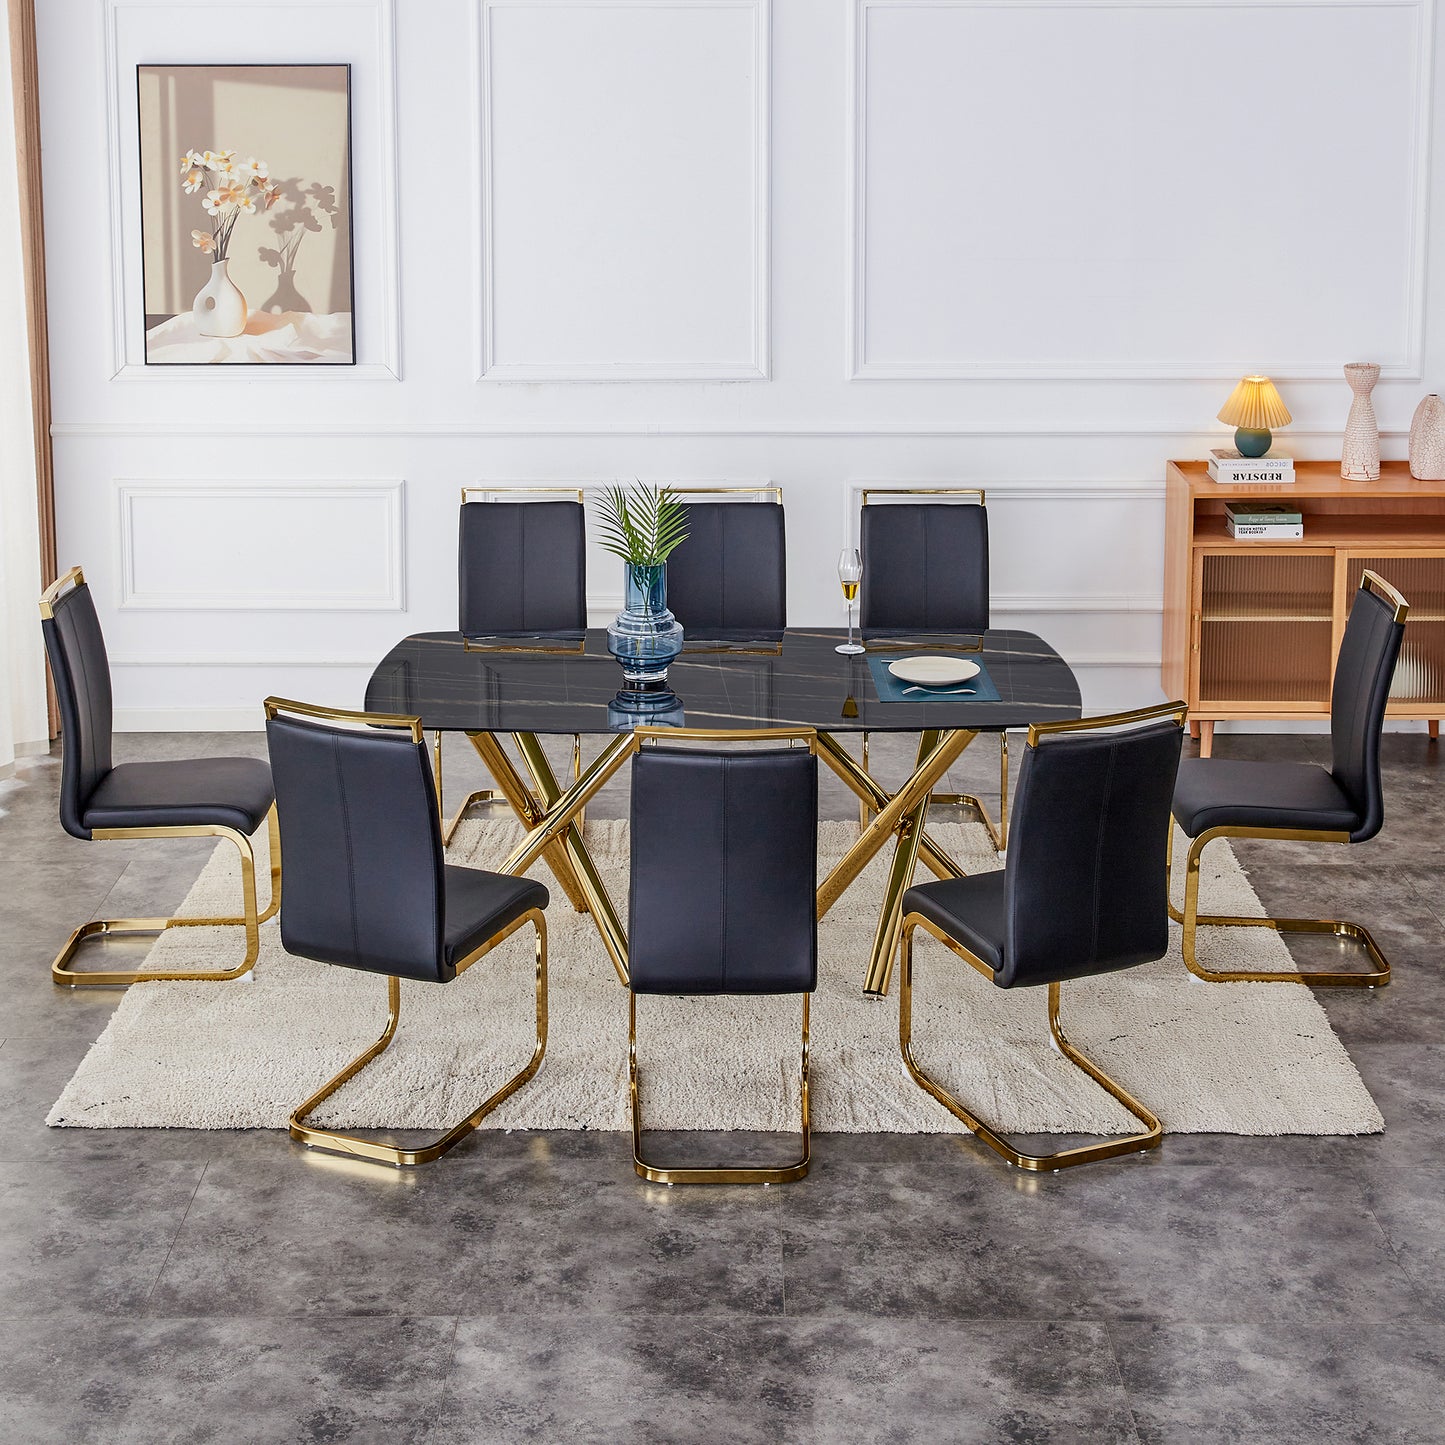 Large modern minimalist rectangular dining table with 0.39 "imitation marble black desktop and gold metal legs, for Kitchen Dining Living Meeting Room Banquet hal  1538